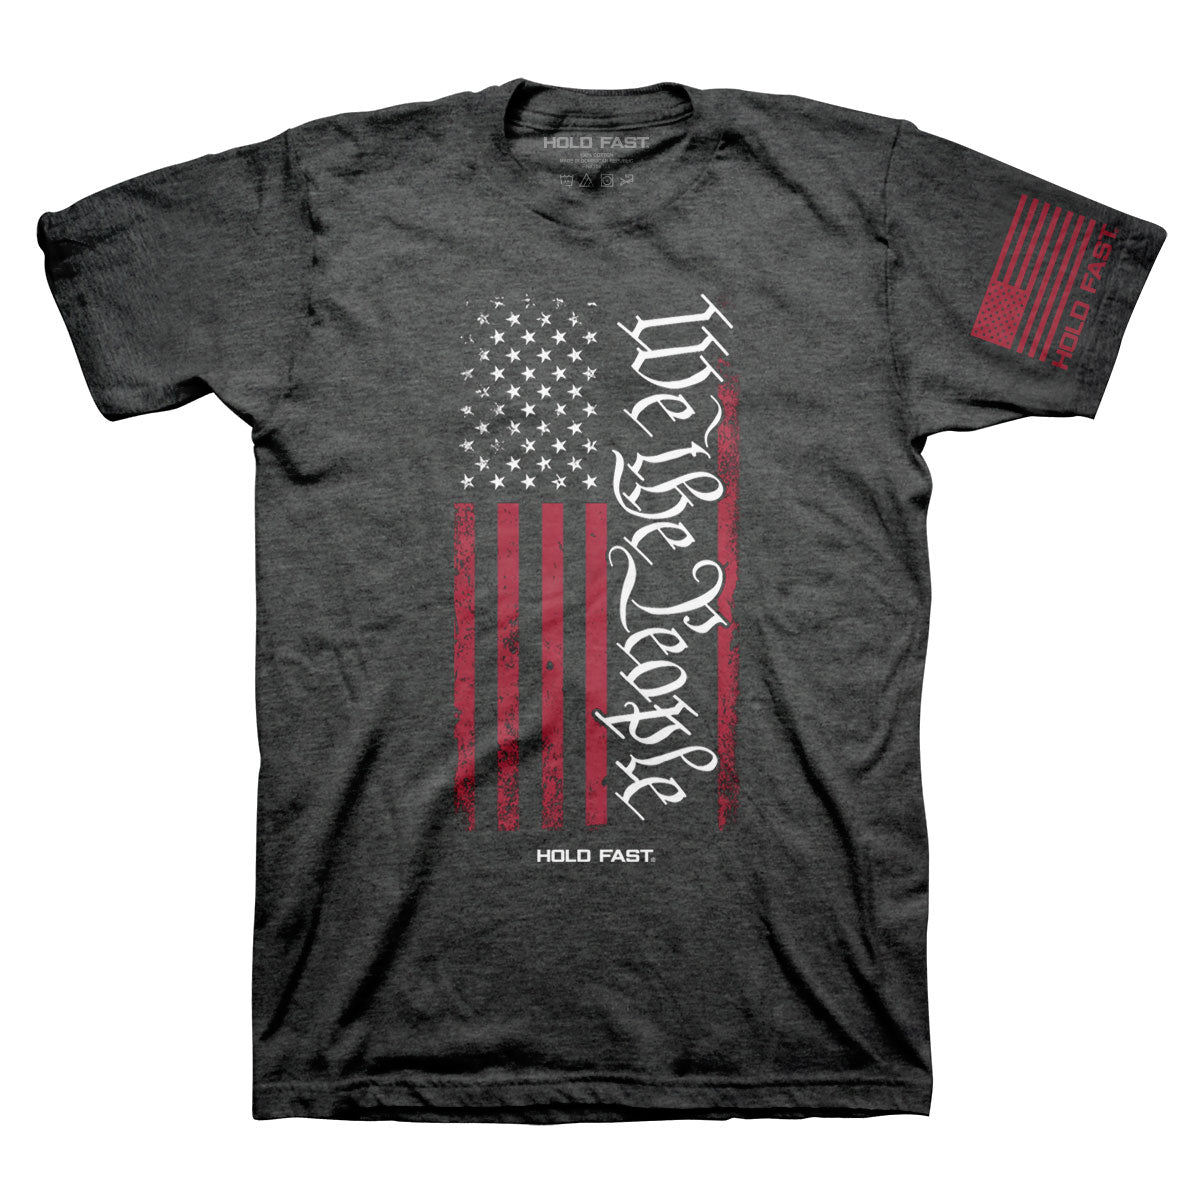 HOLD FAST We the People Shirt for Men